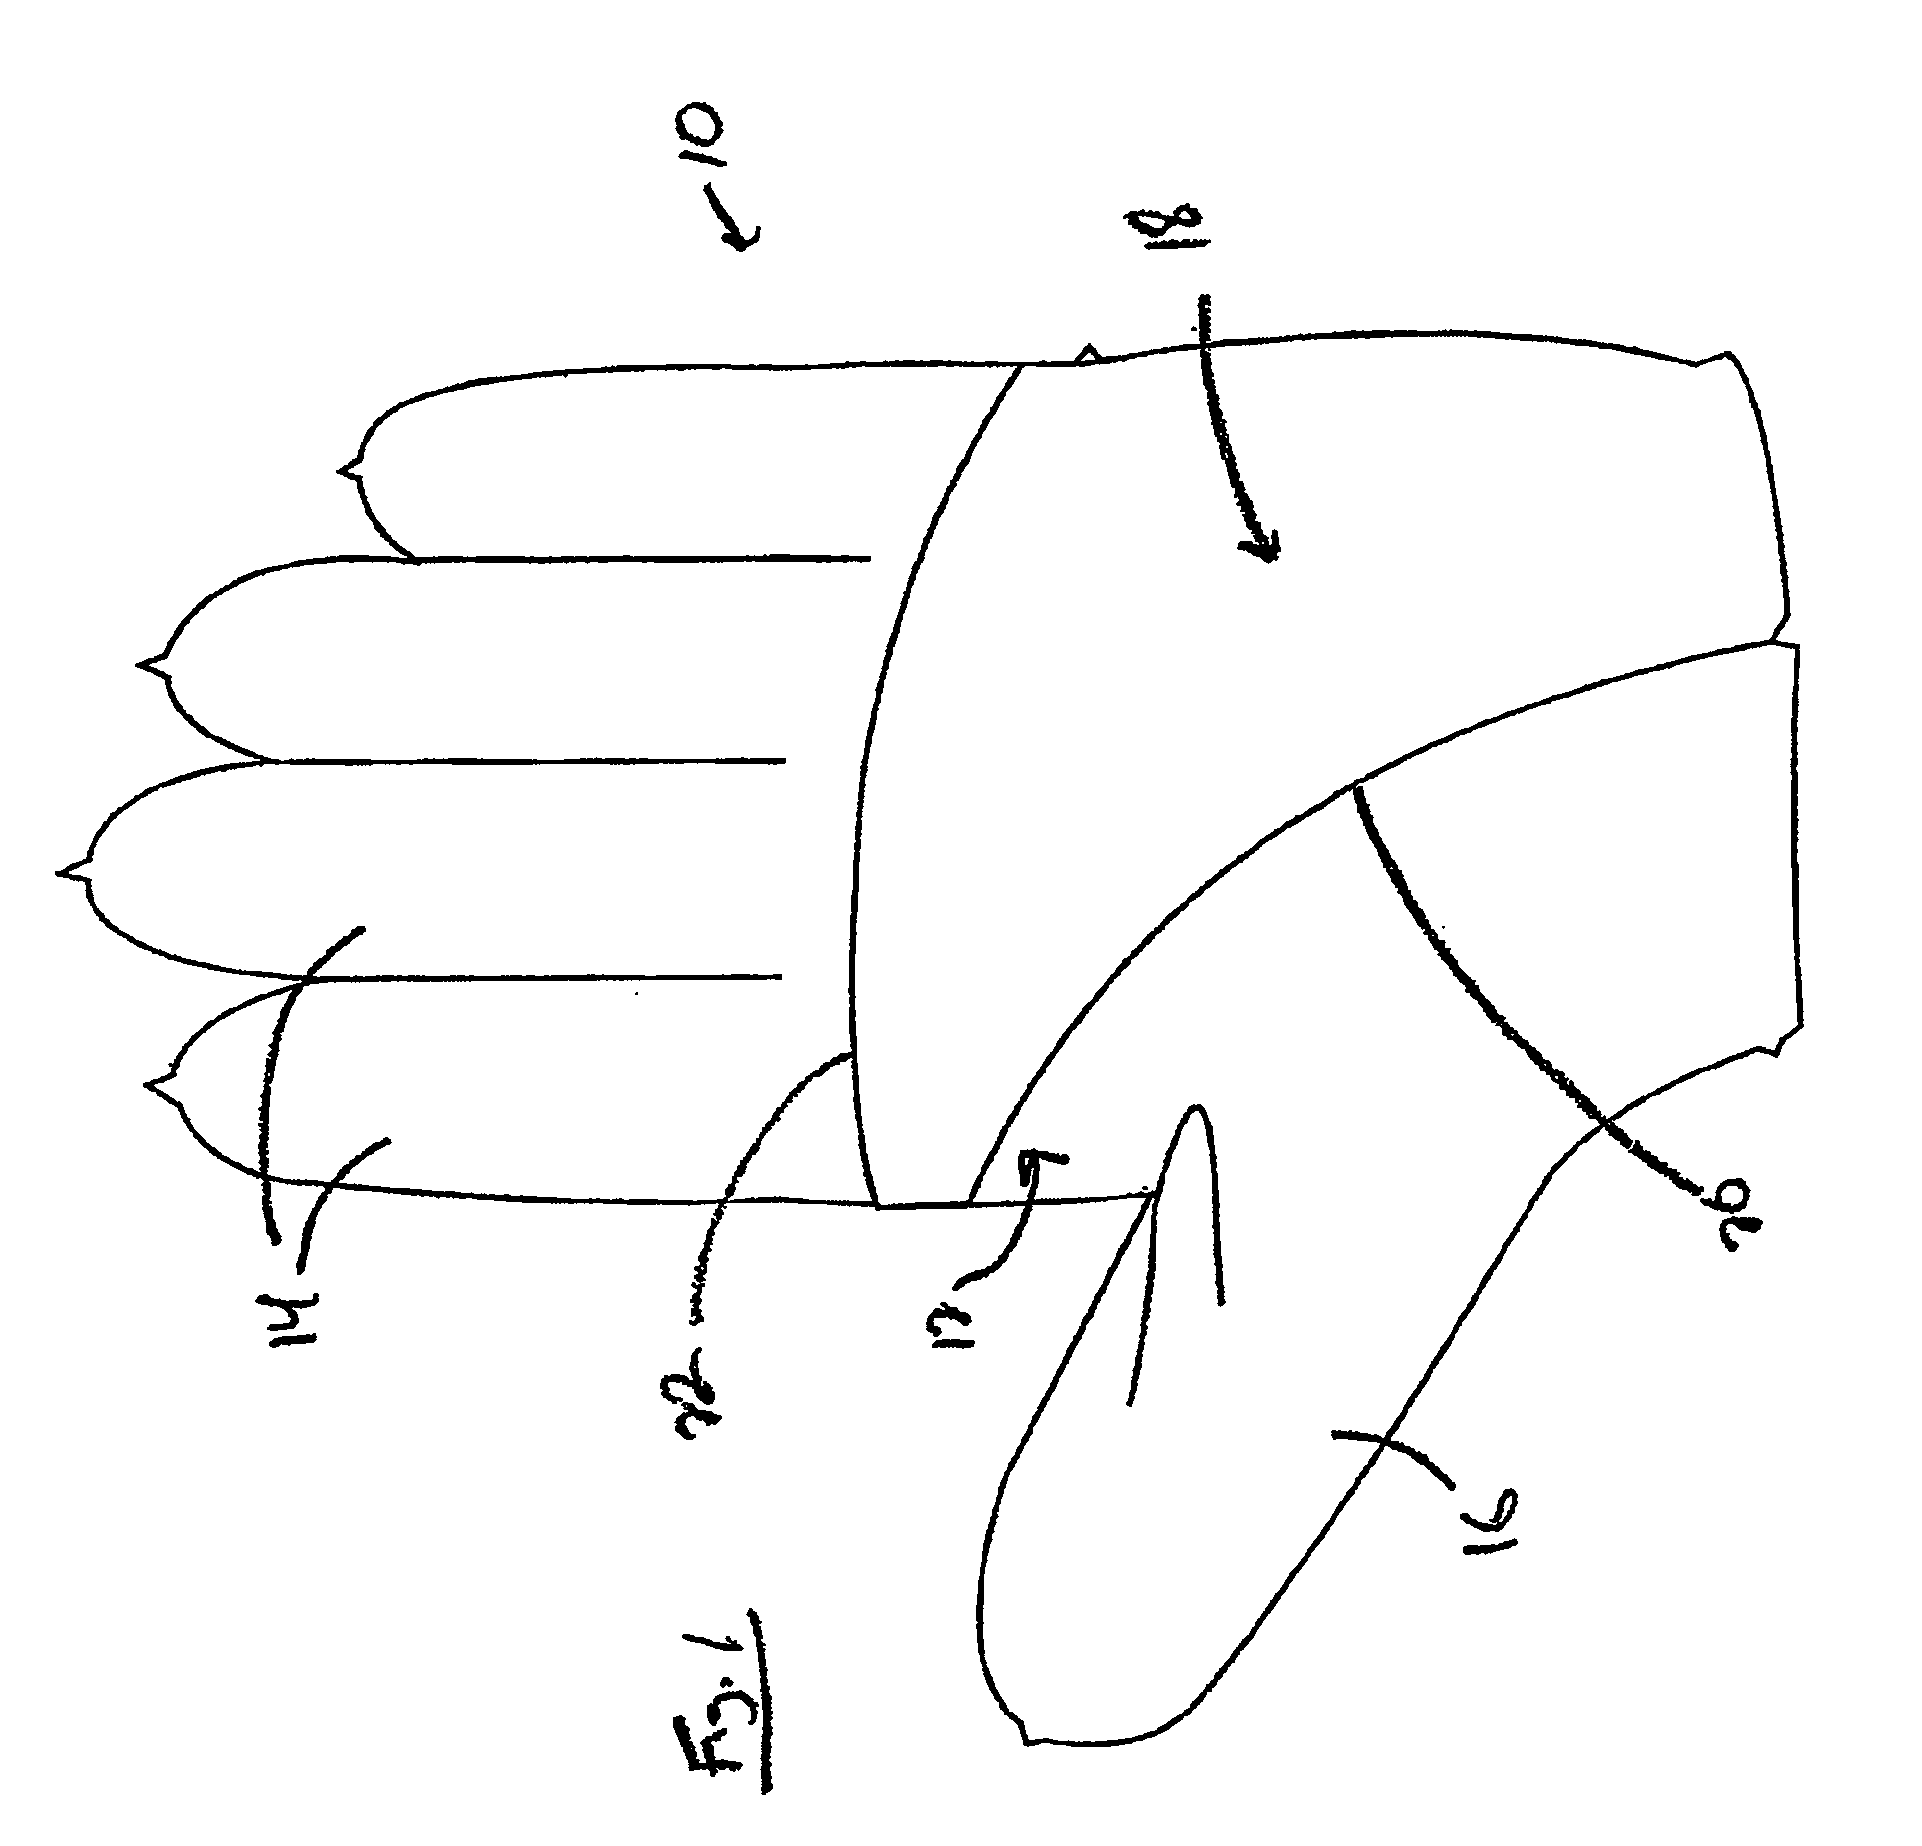 Glove with Non-Bunching Palm Construction